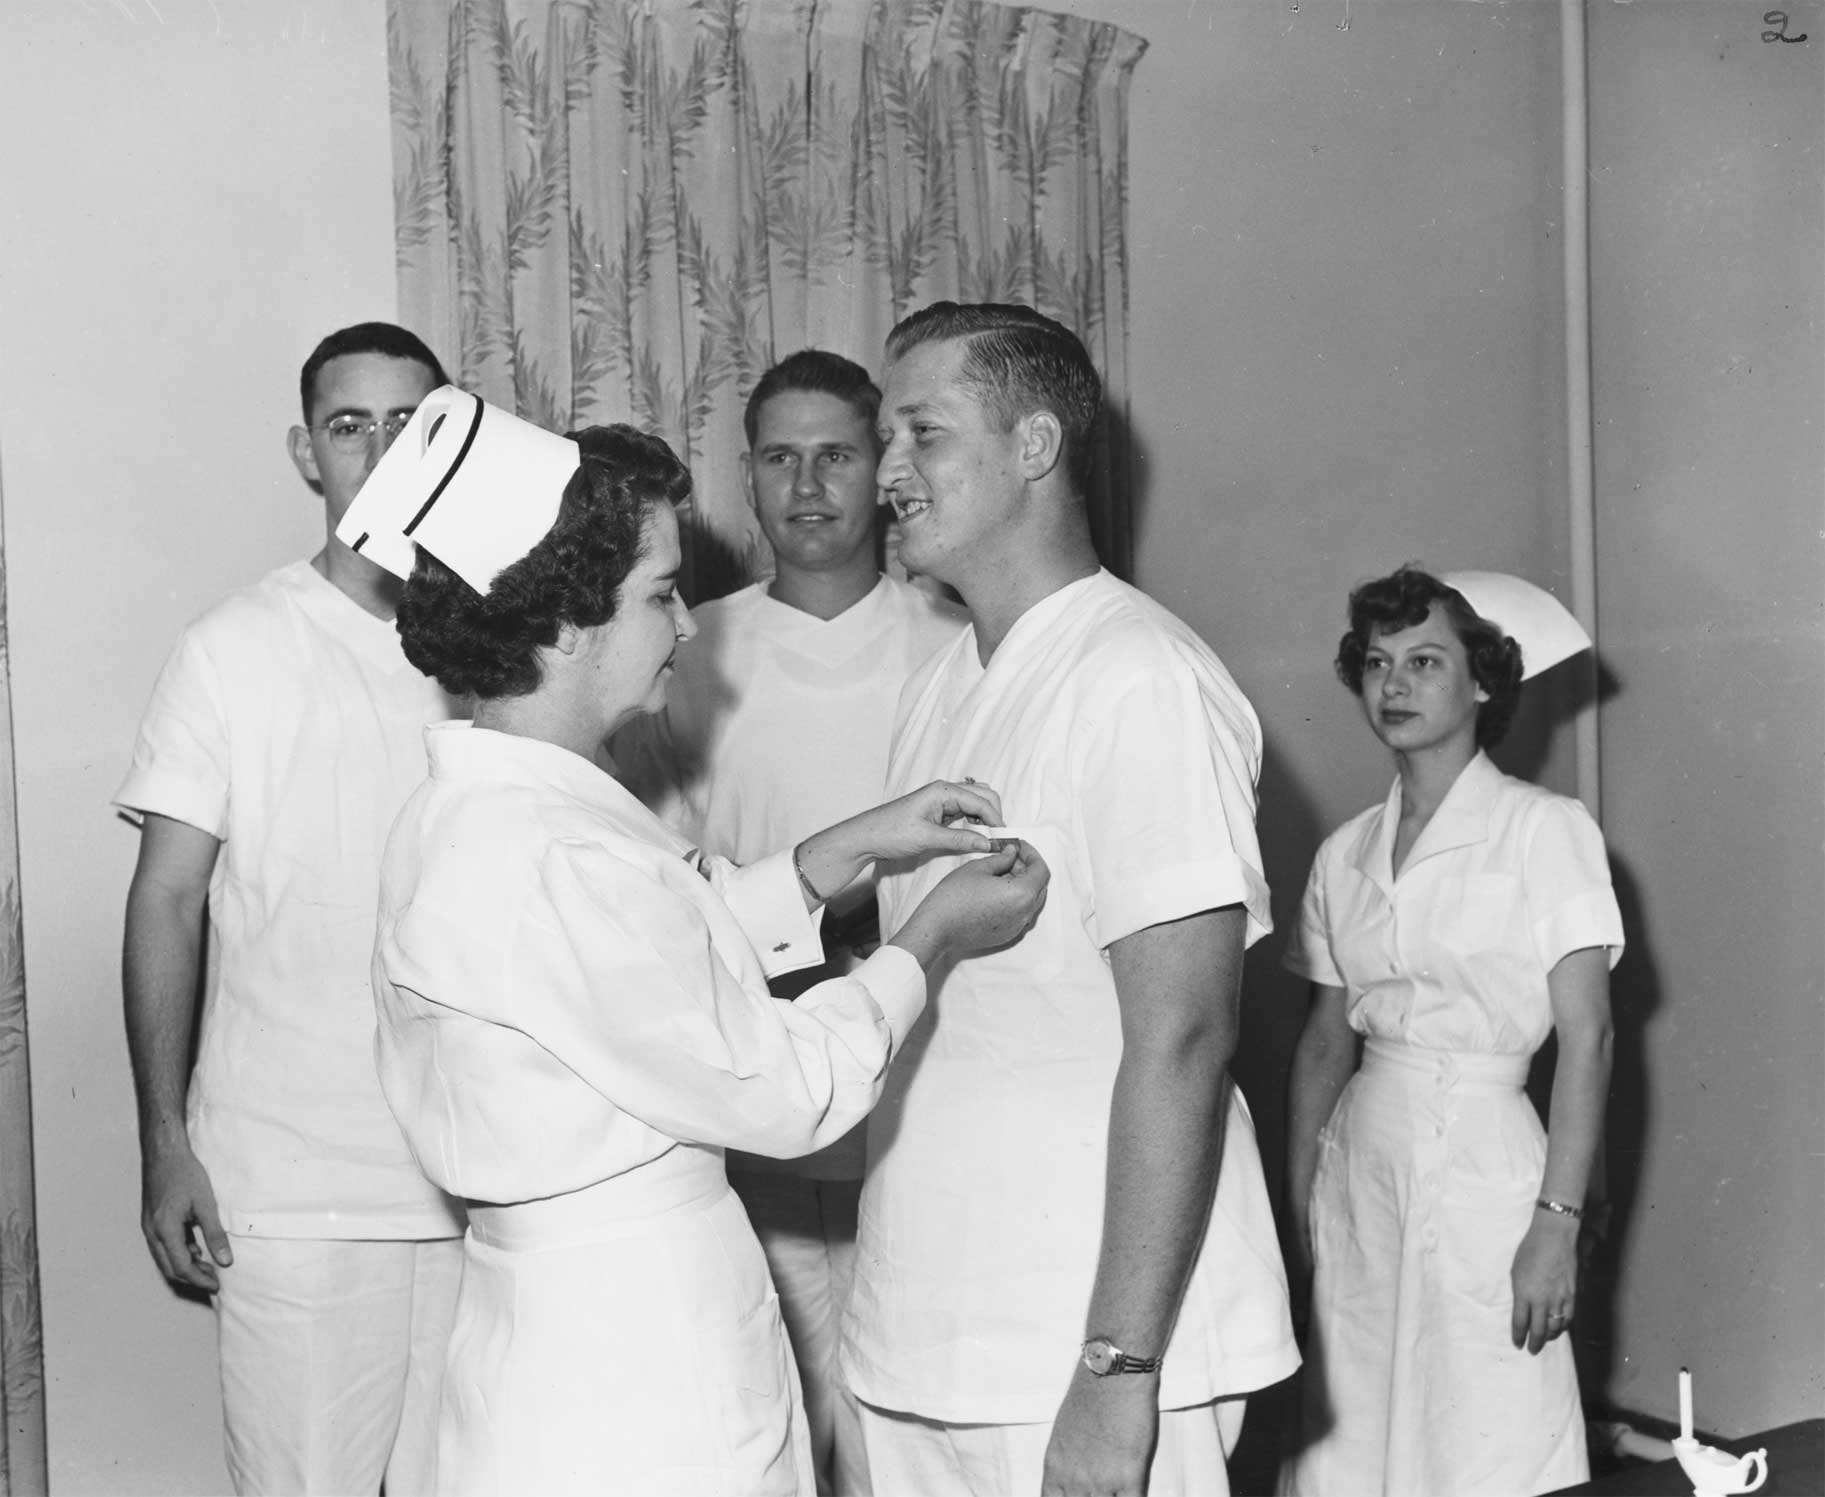 Male nurse receiving a pin during a capping ceremony, while three nurses look on